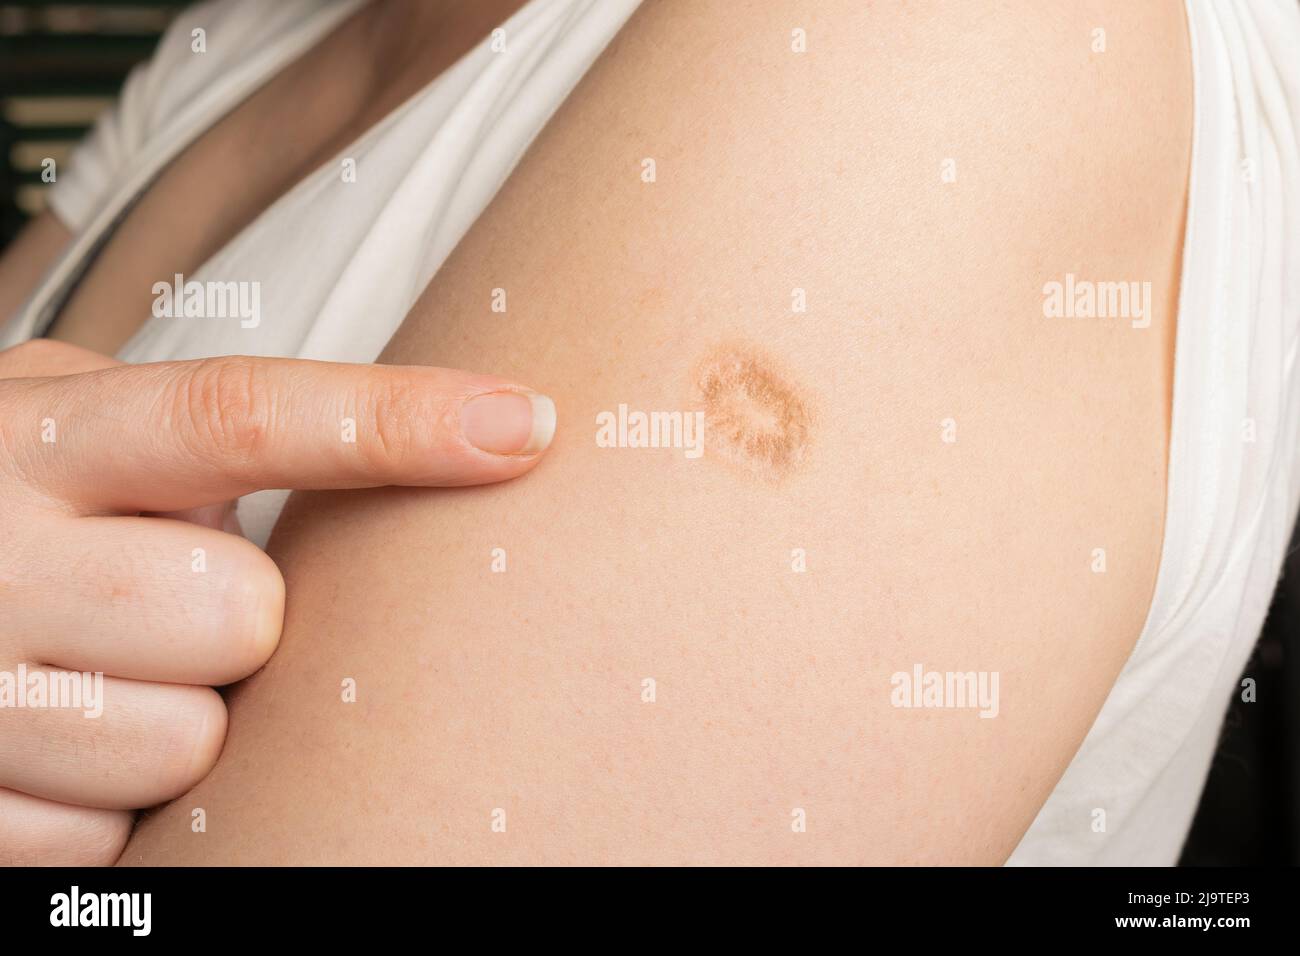 Monkeypox and smallpox vaccine scar on a woman's left arm Stock Photo